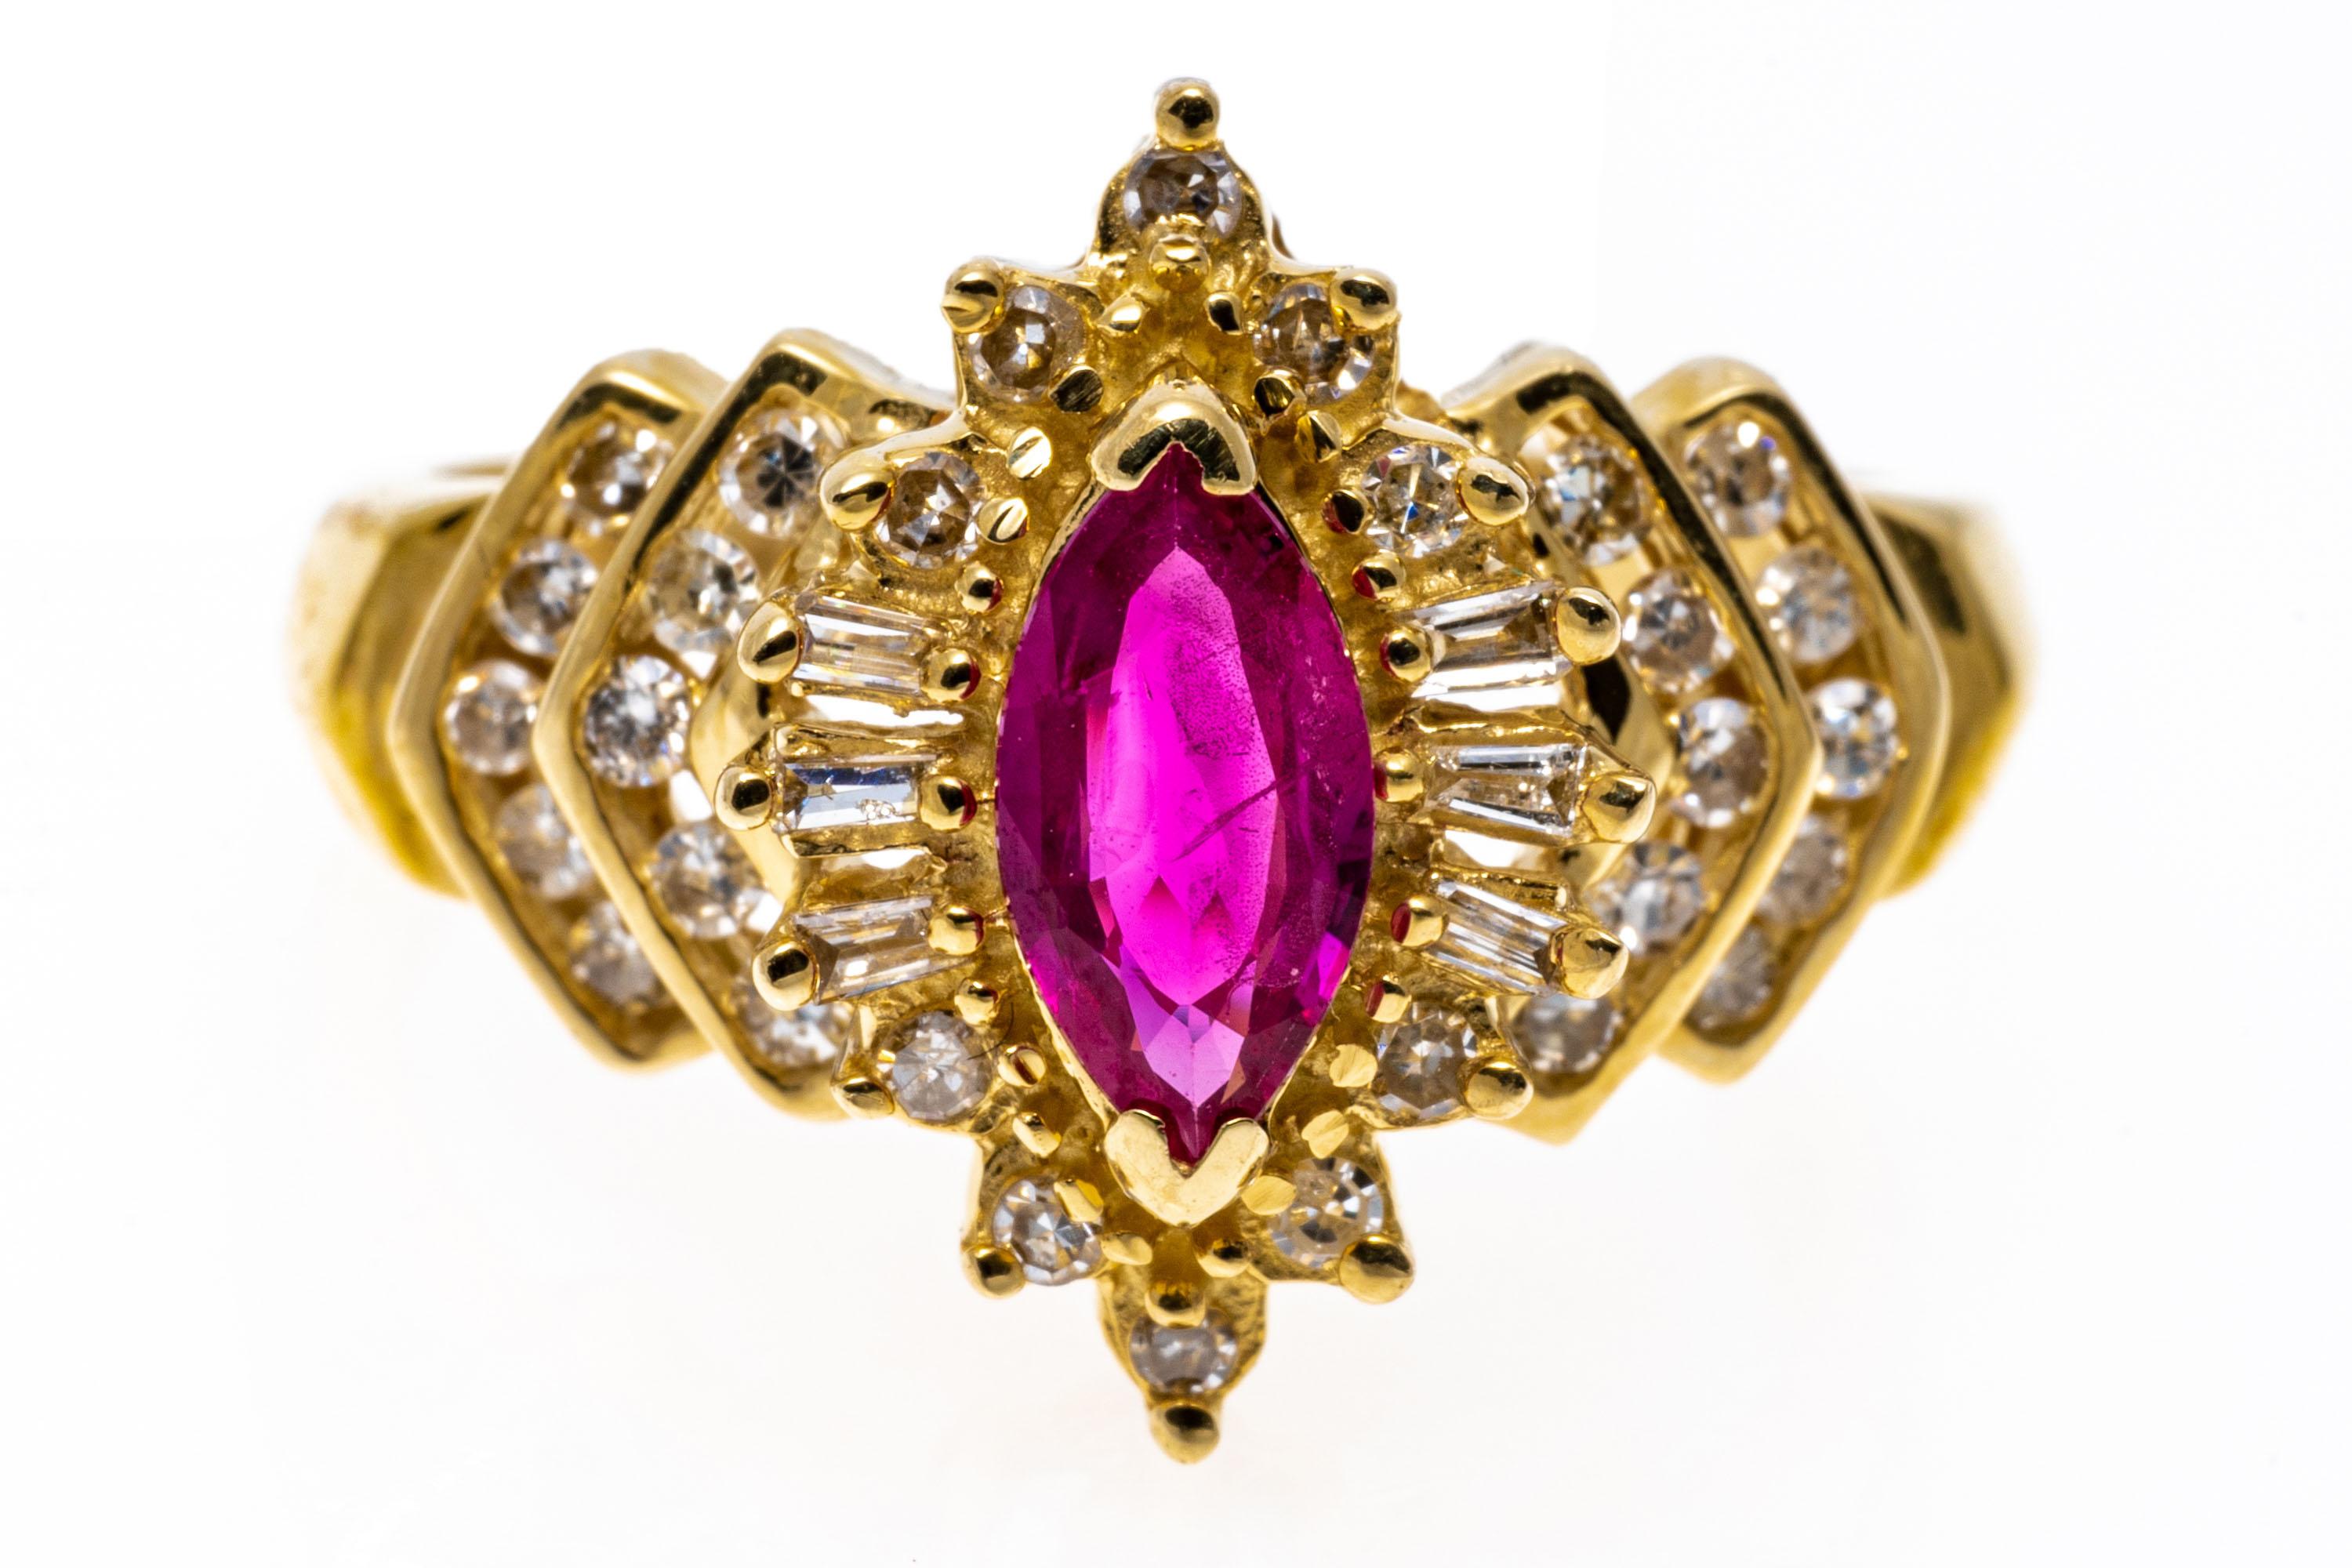 This ornate ring is a ballerina style, with a center marquise faceted, reddish pink color ruby, approximately 0.38 CTS, surrounded with a ballerina style baguette diamond frame, approximately 0.06 TCW, prong set, and flanked by chevron pattern